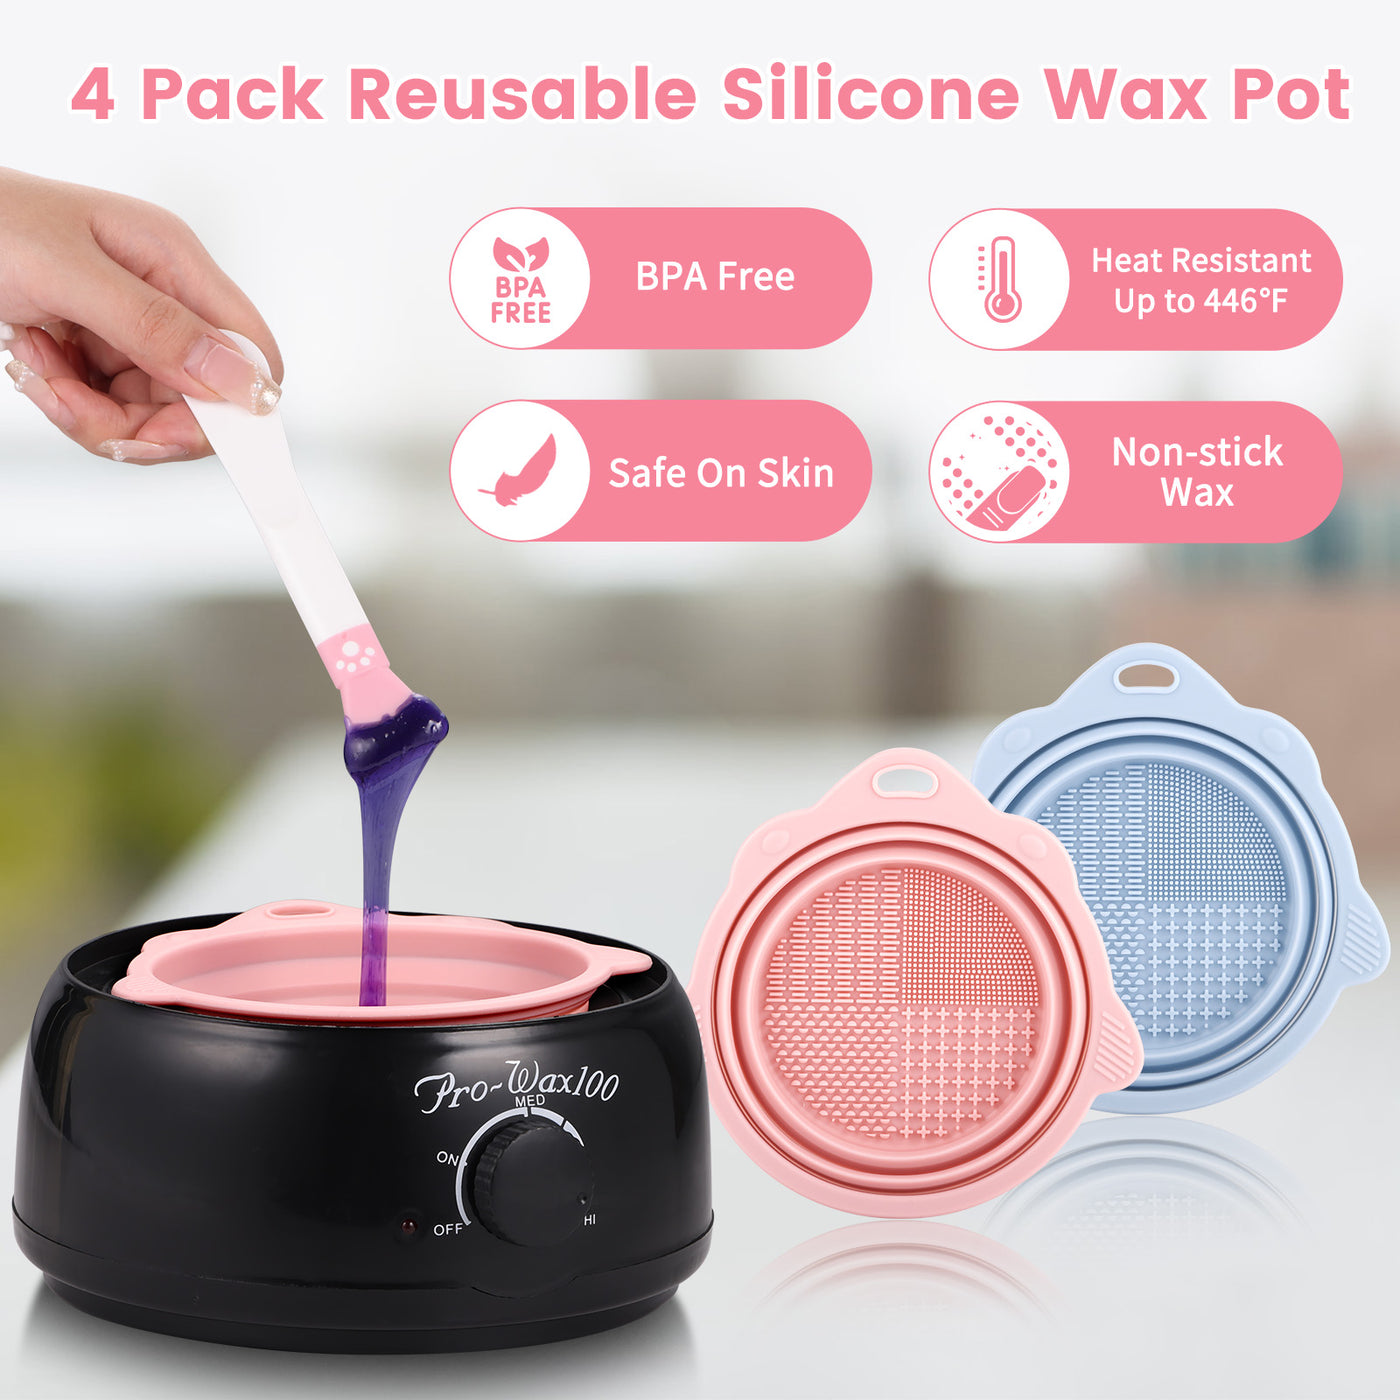 4 Pack Wax Warmer Silicone Liner, Silicone Wax Pot for 16oz Wax Warmer, Non-Stick Silicone Wax Bowl with 4pcs Reusable Spatulas, Foldable Melt Wax Pot Replacement Liner for Hair Removal Waxing Kit